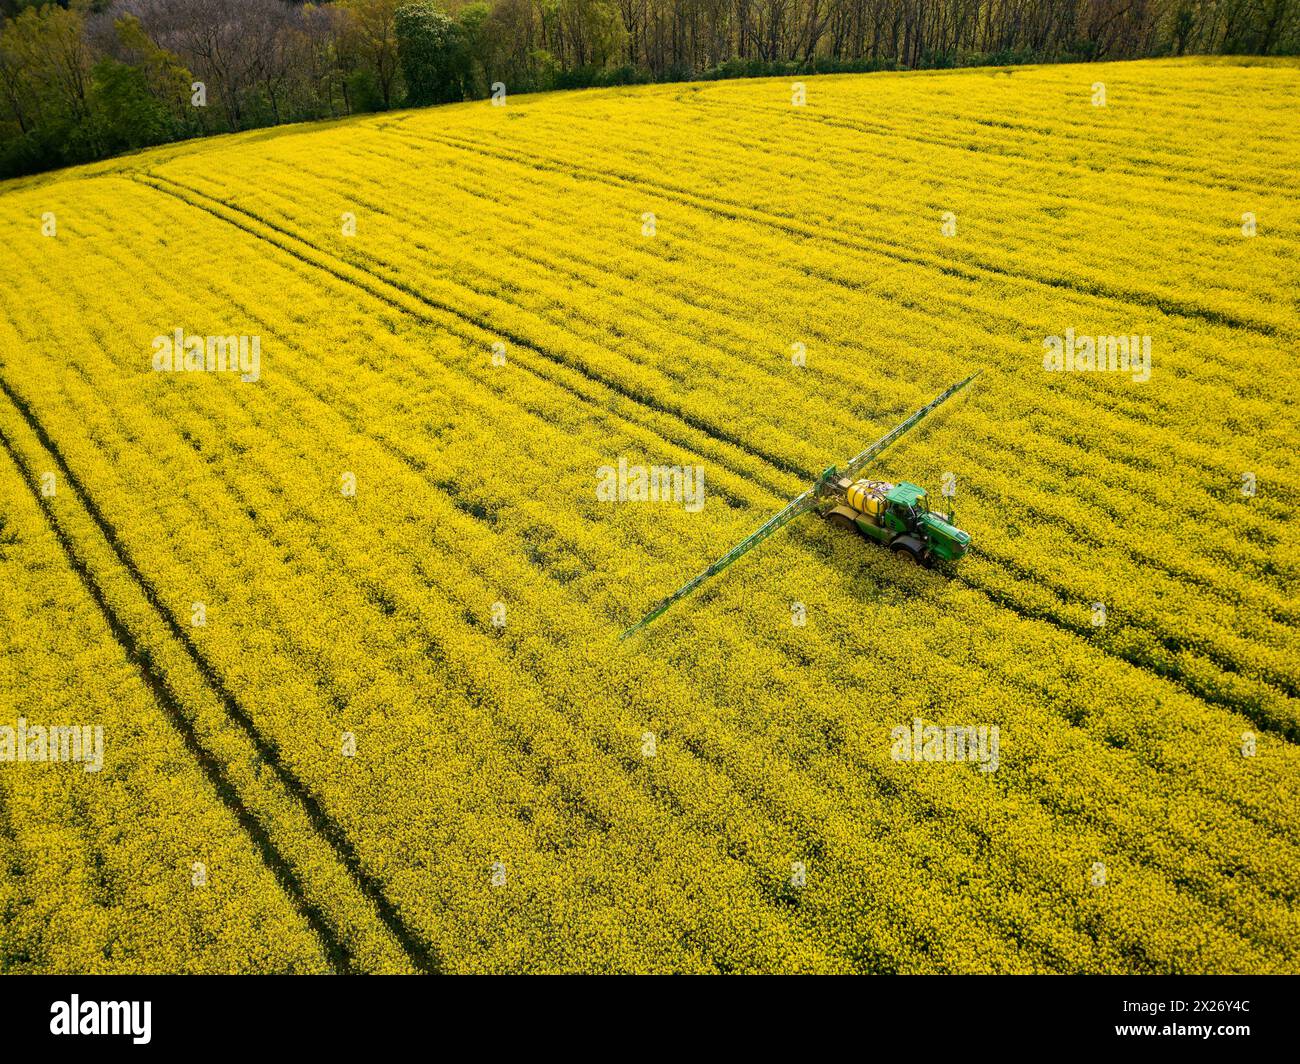 Application of plant protection products, Possendorf, Saxony, Germany Stock Photo